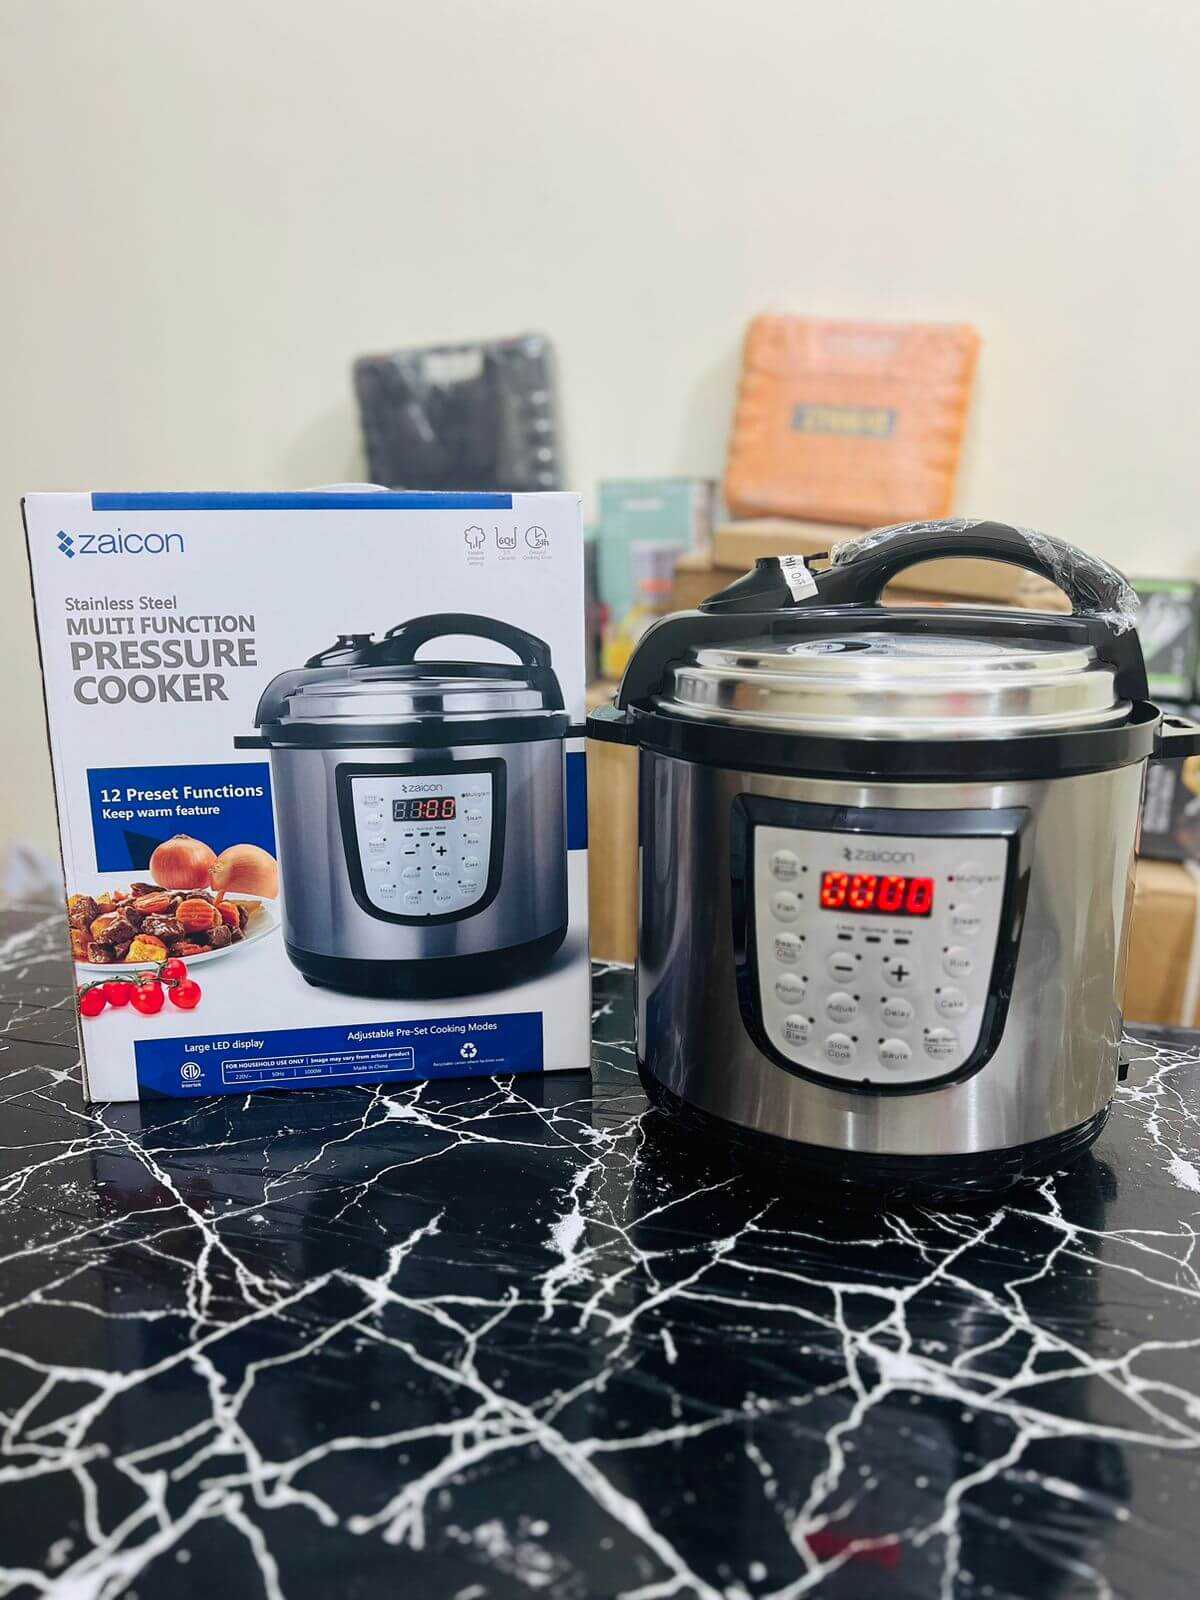 Original USA lot ZAICON Stainless Stell Multifunction Pressure Cooker